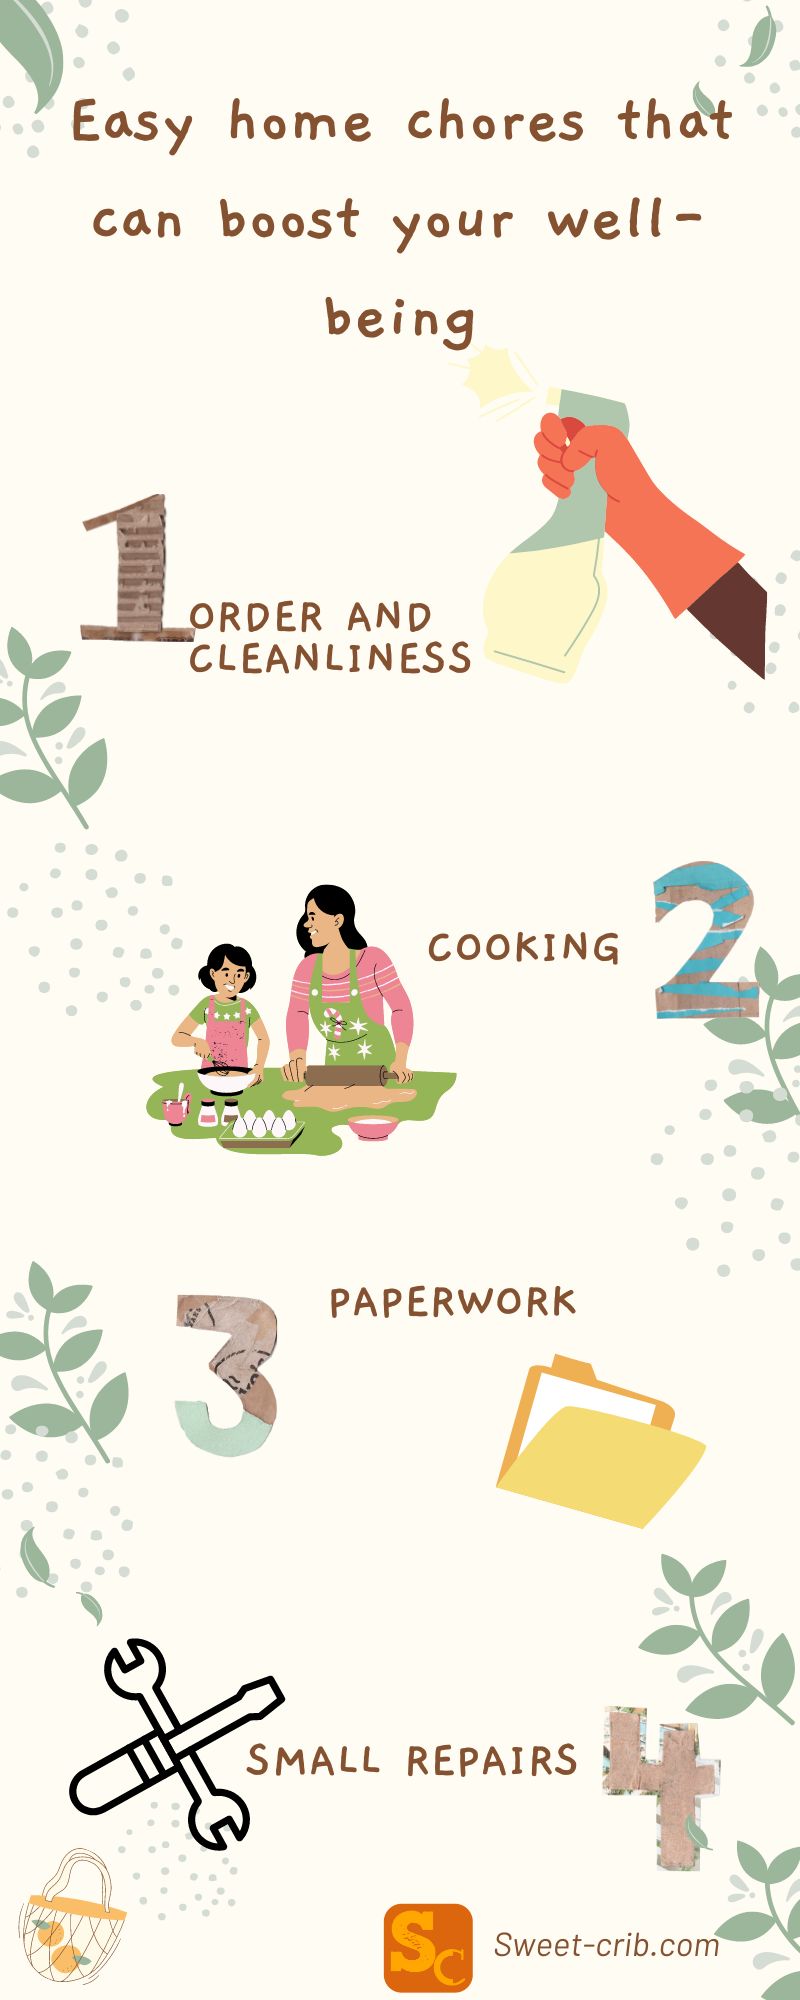 Infographic for Easy Home Chores That Can Boost Your well-being